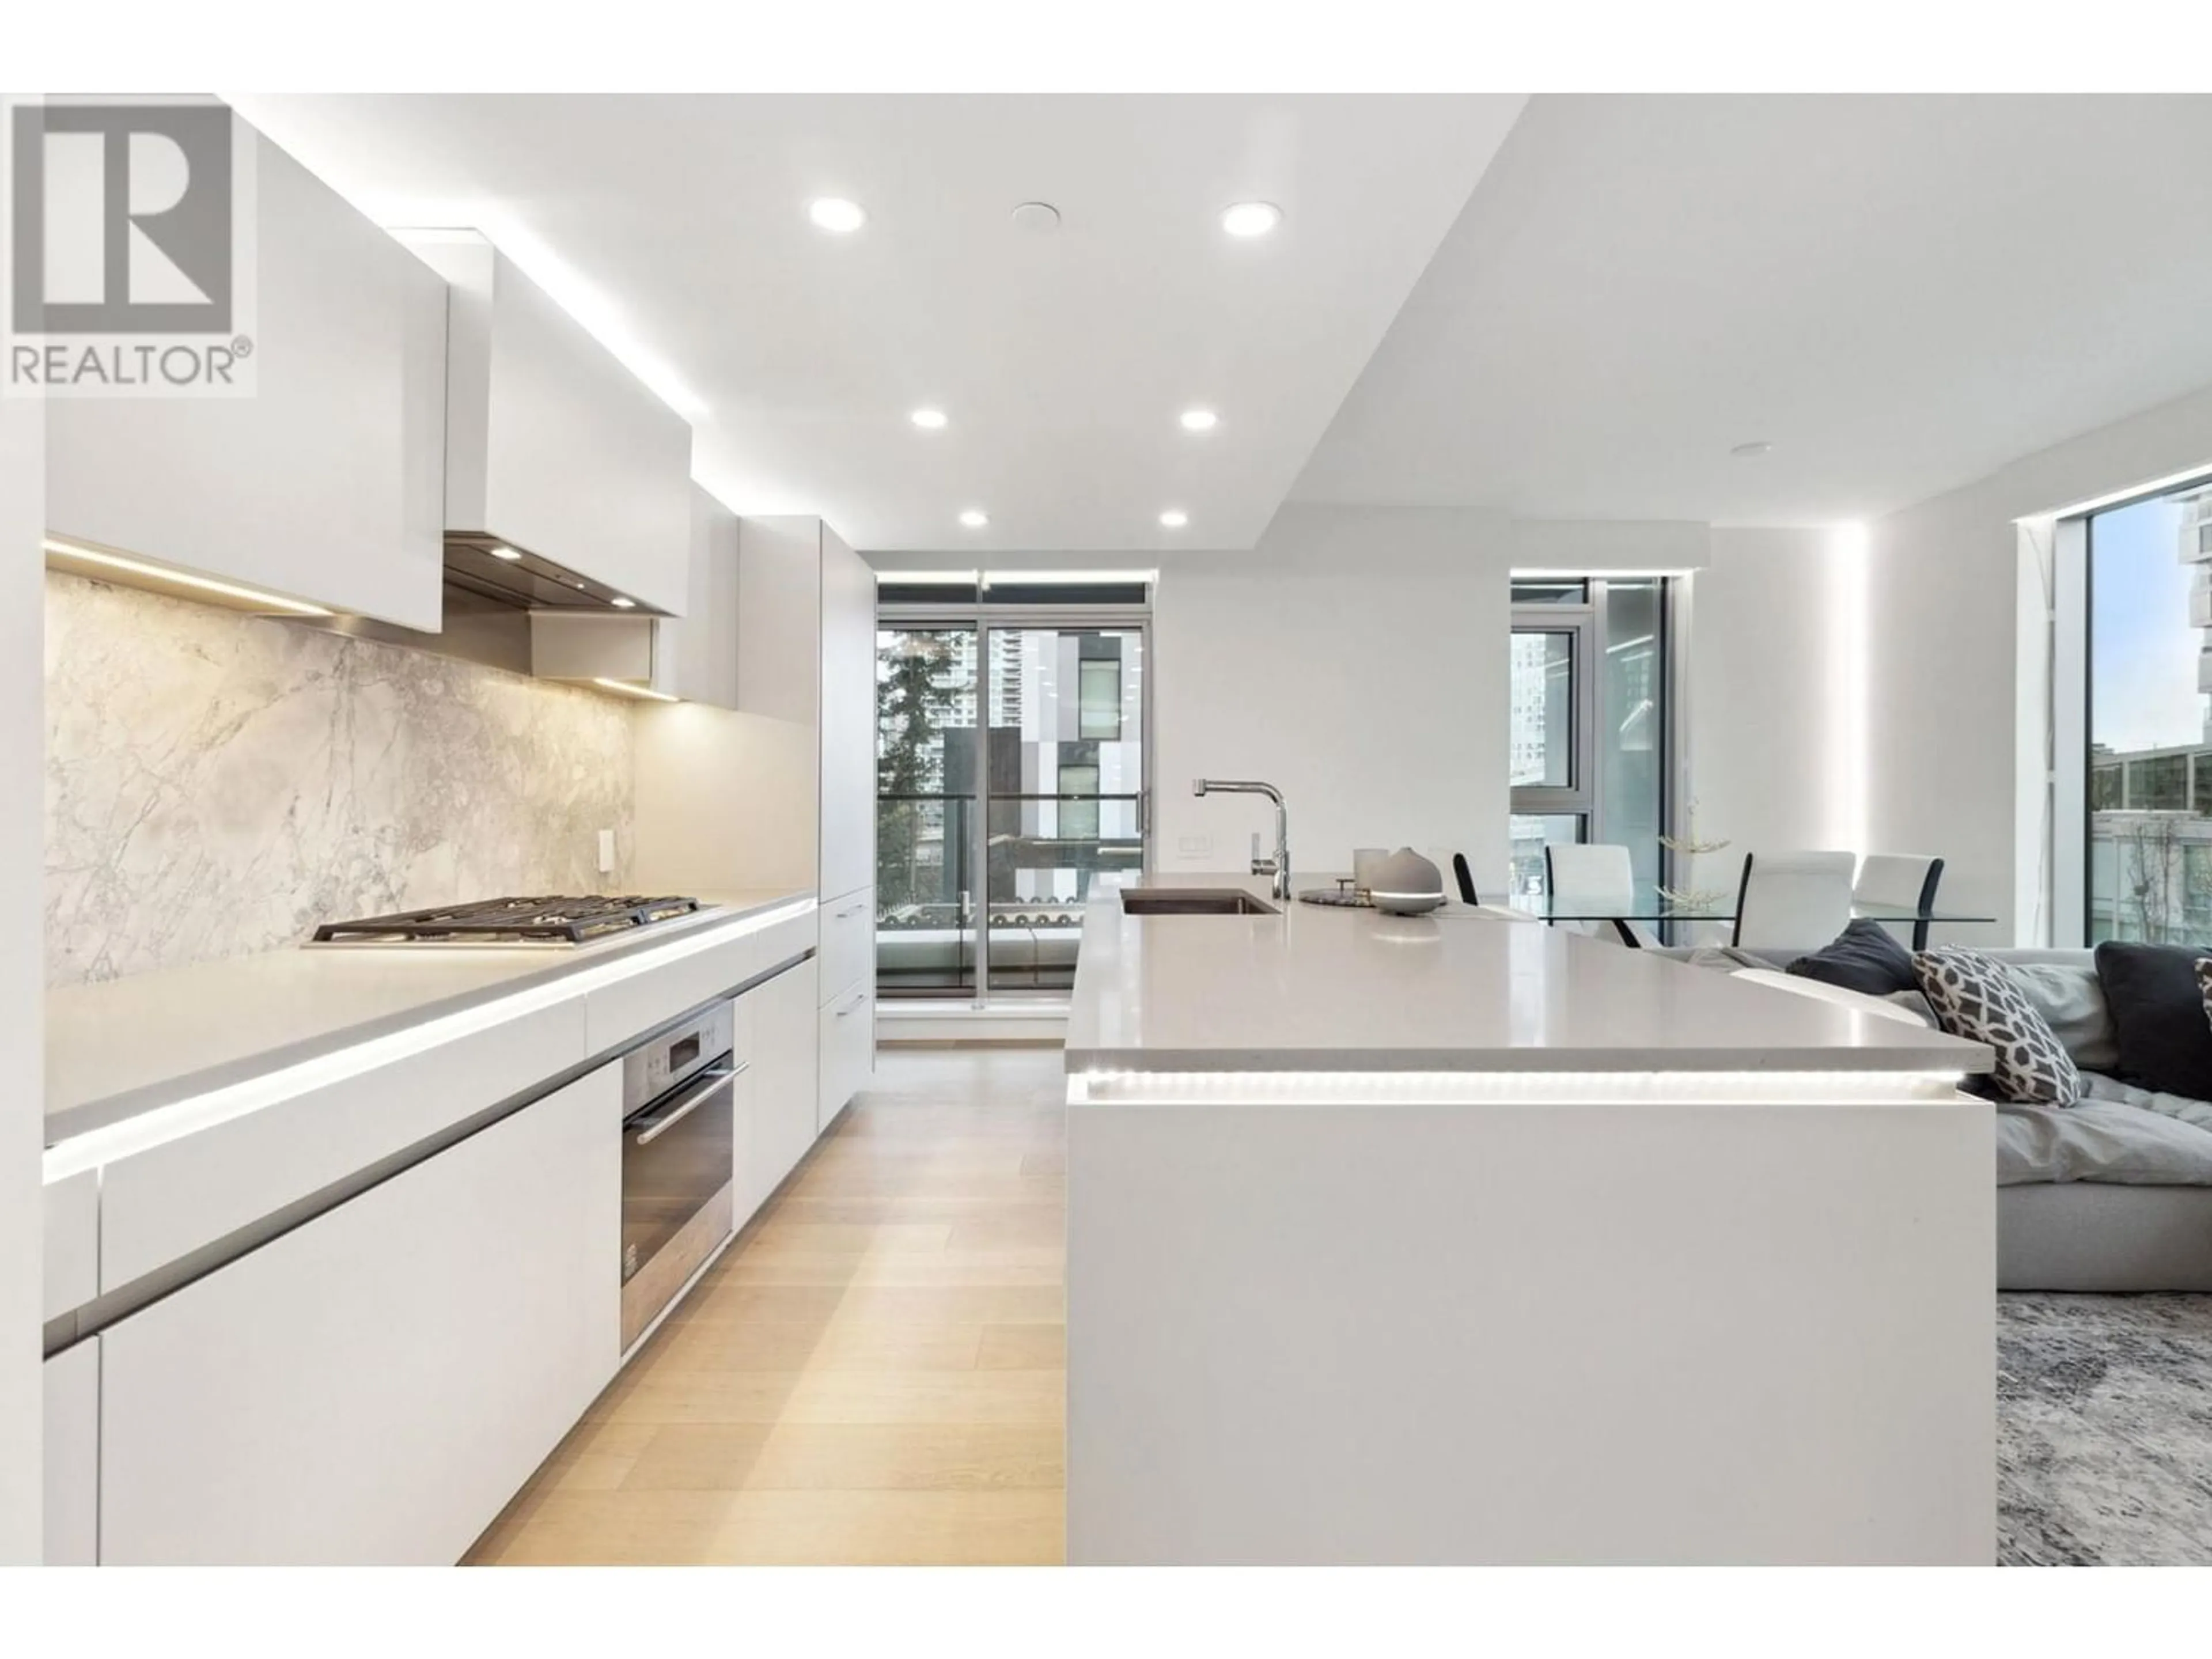 Contemporary kitchen for 301 889 PACIFIC STREET, Vancouver British Columbia V6Z1C3